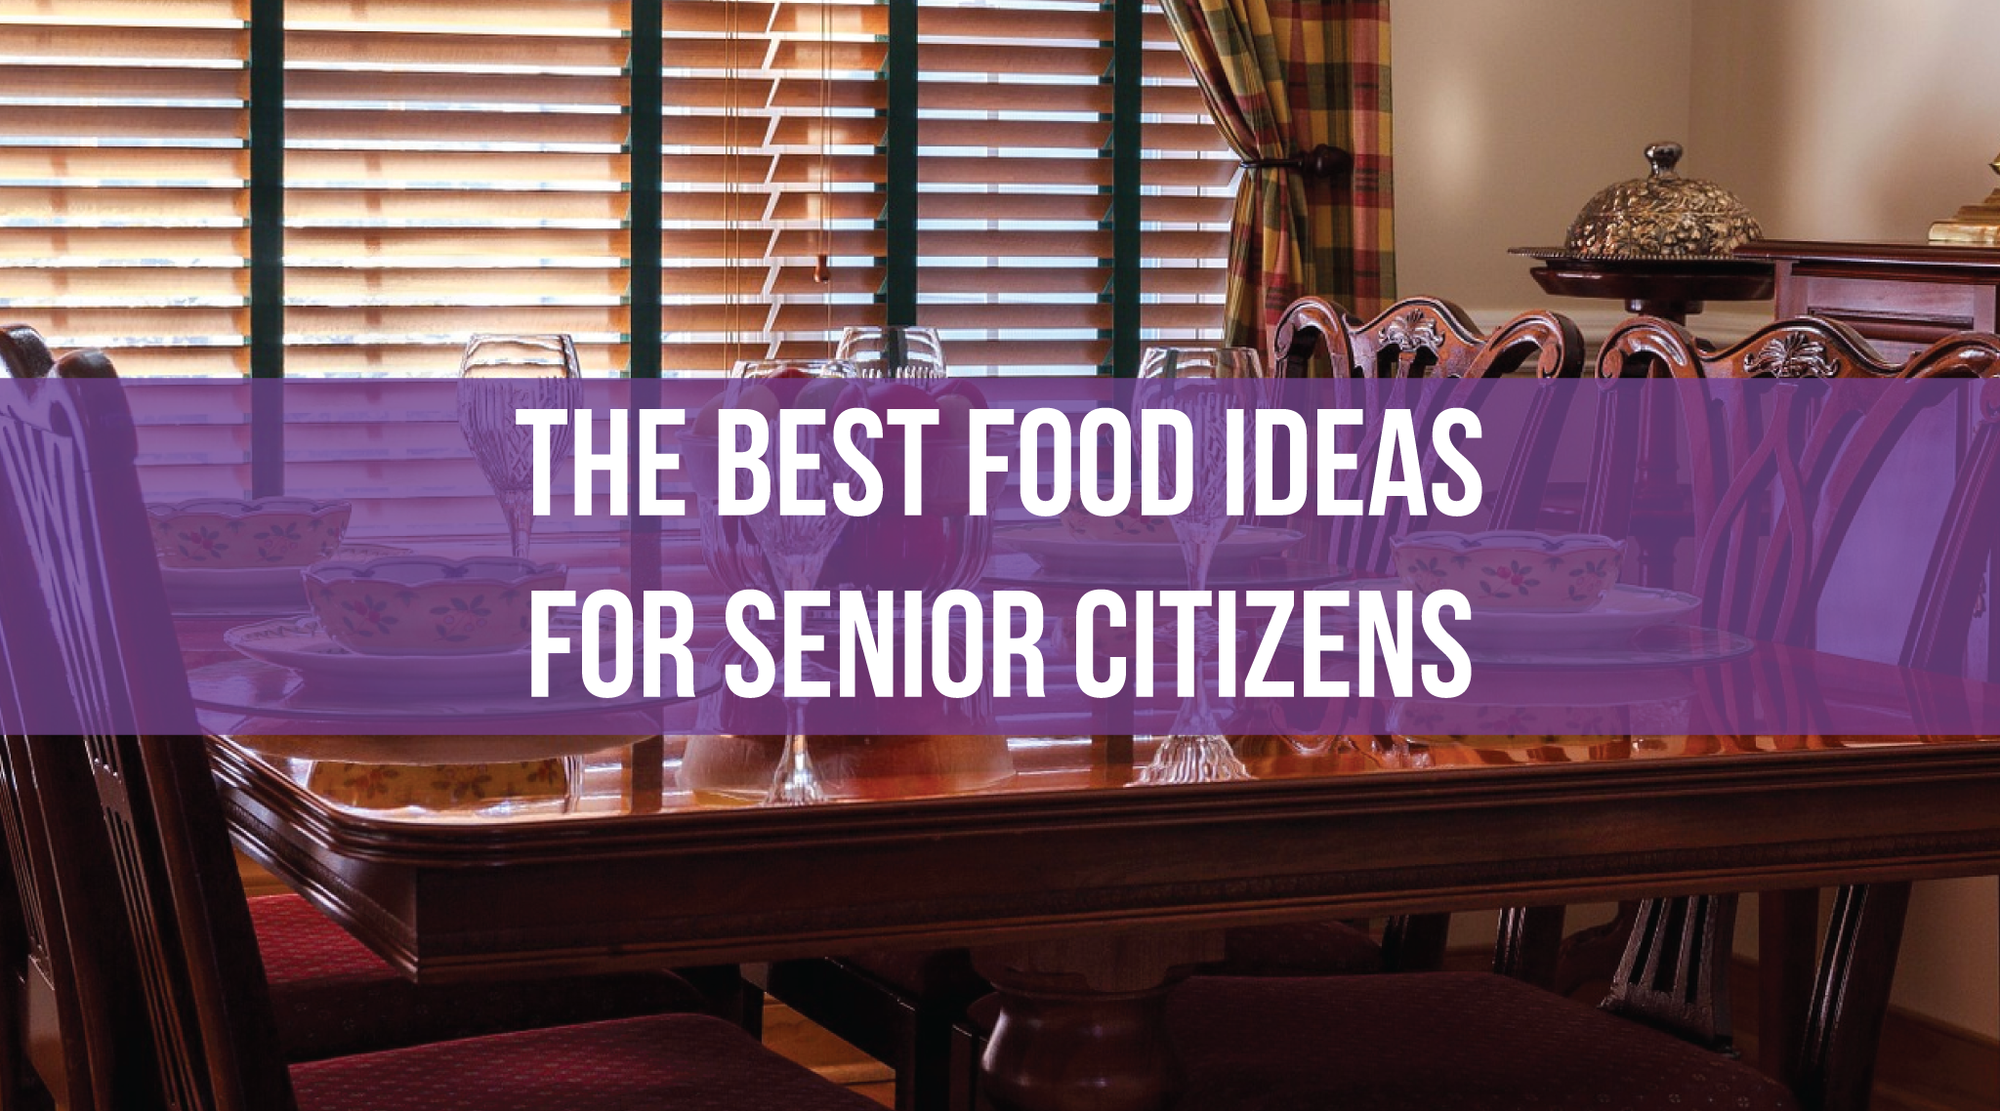 The Best Food Ideas for Senior Citizens